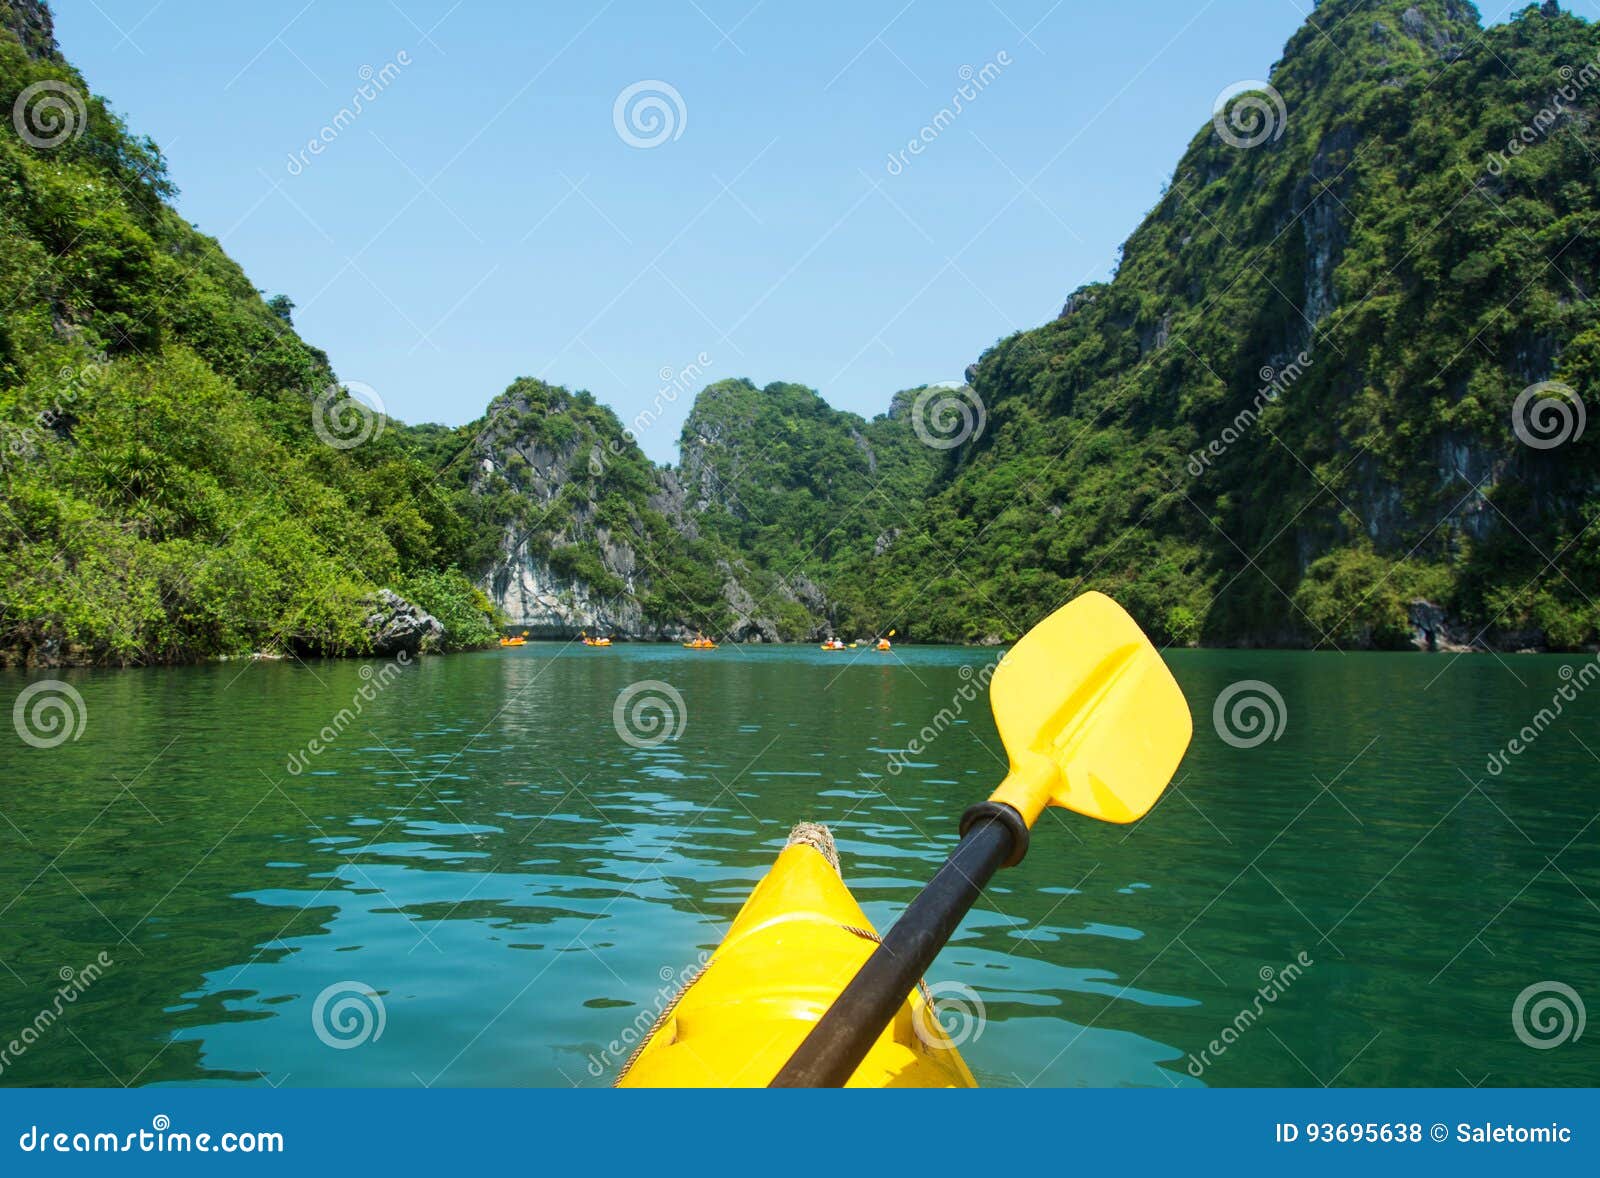 kayaking though the halong bay first person